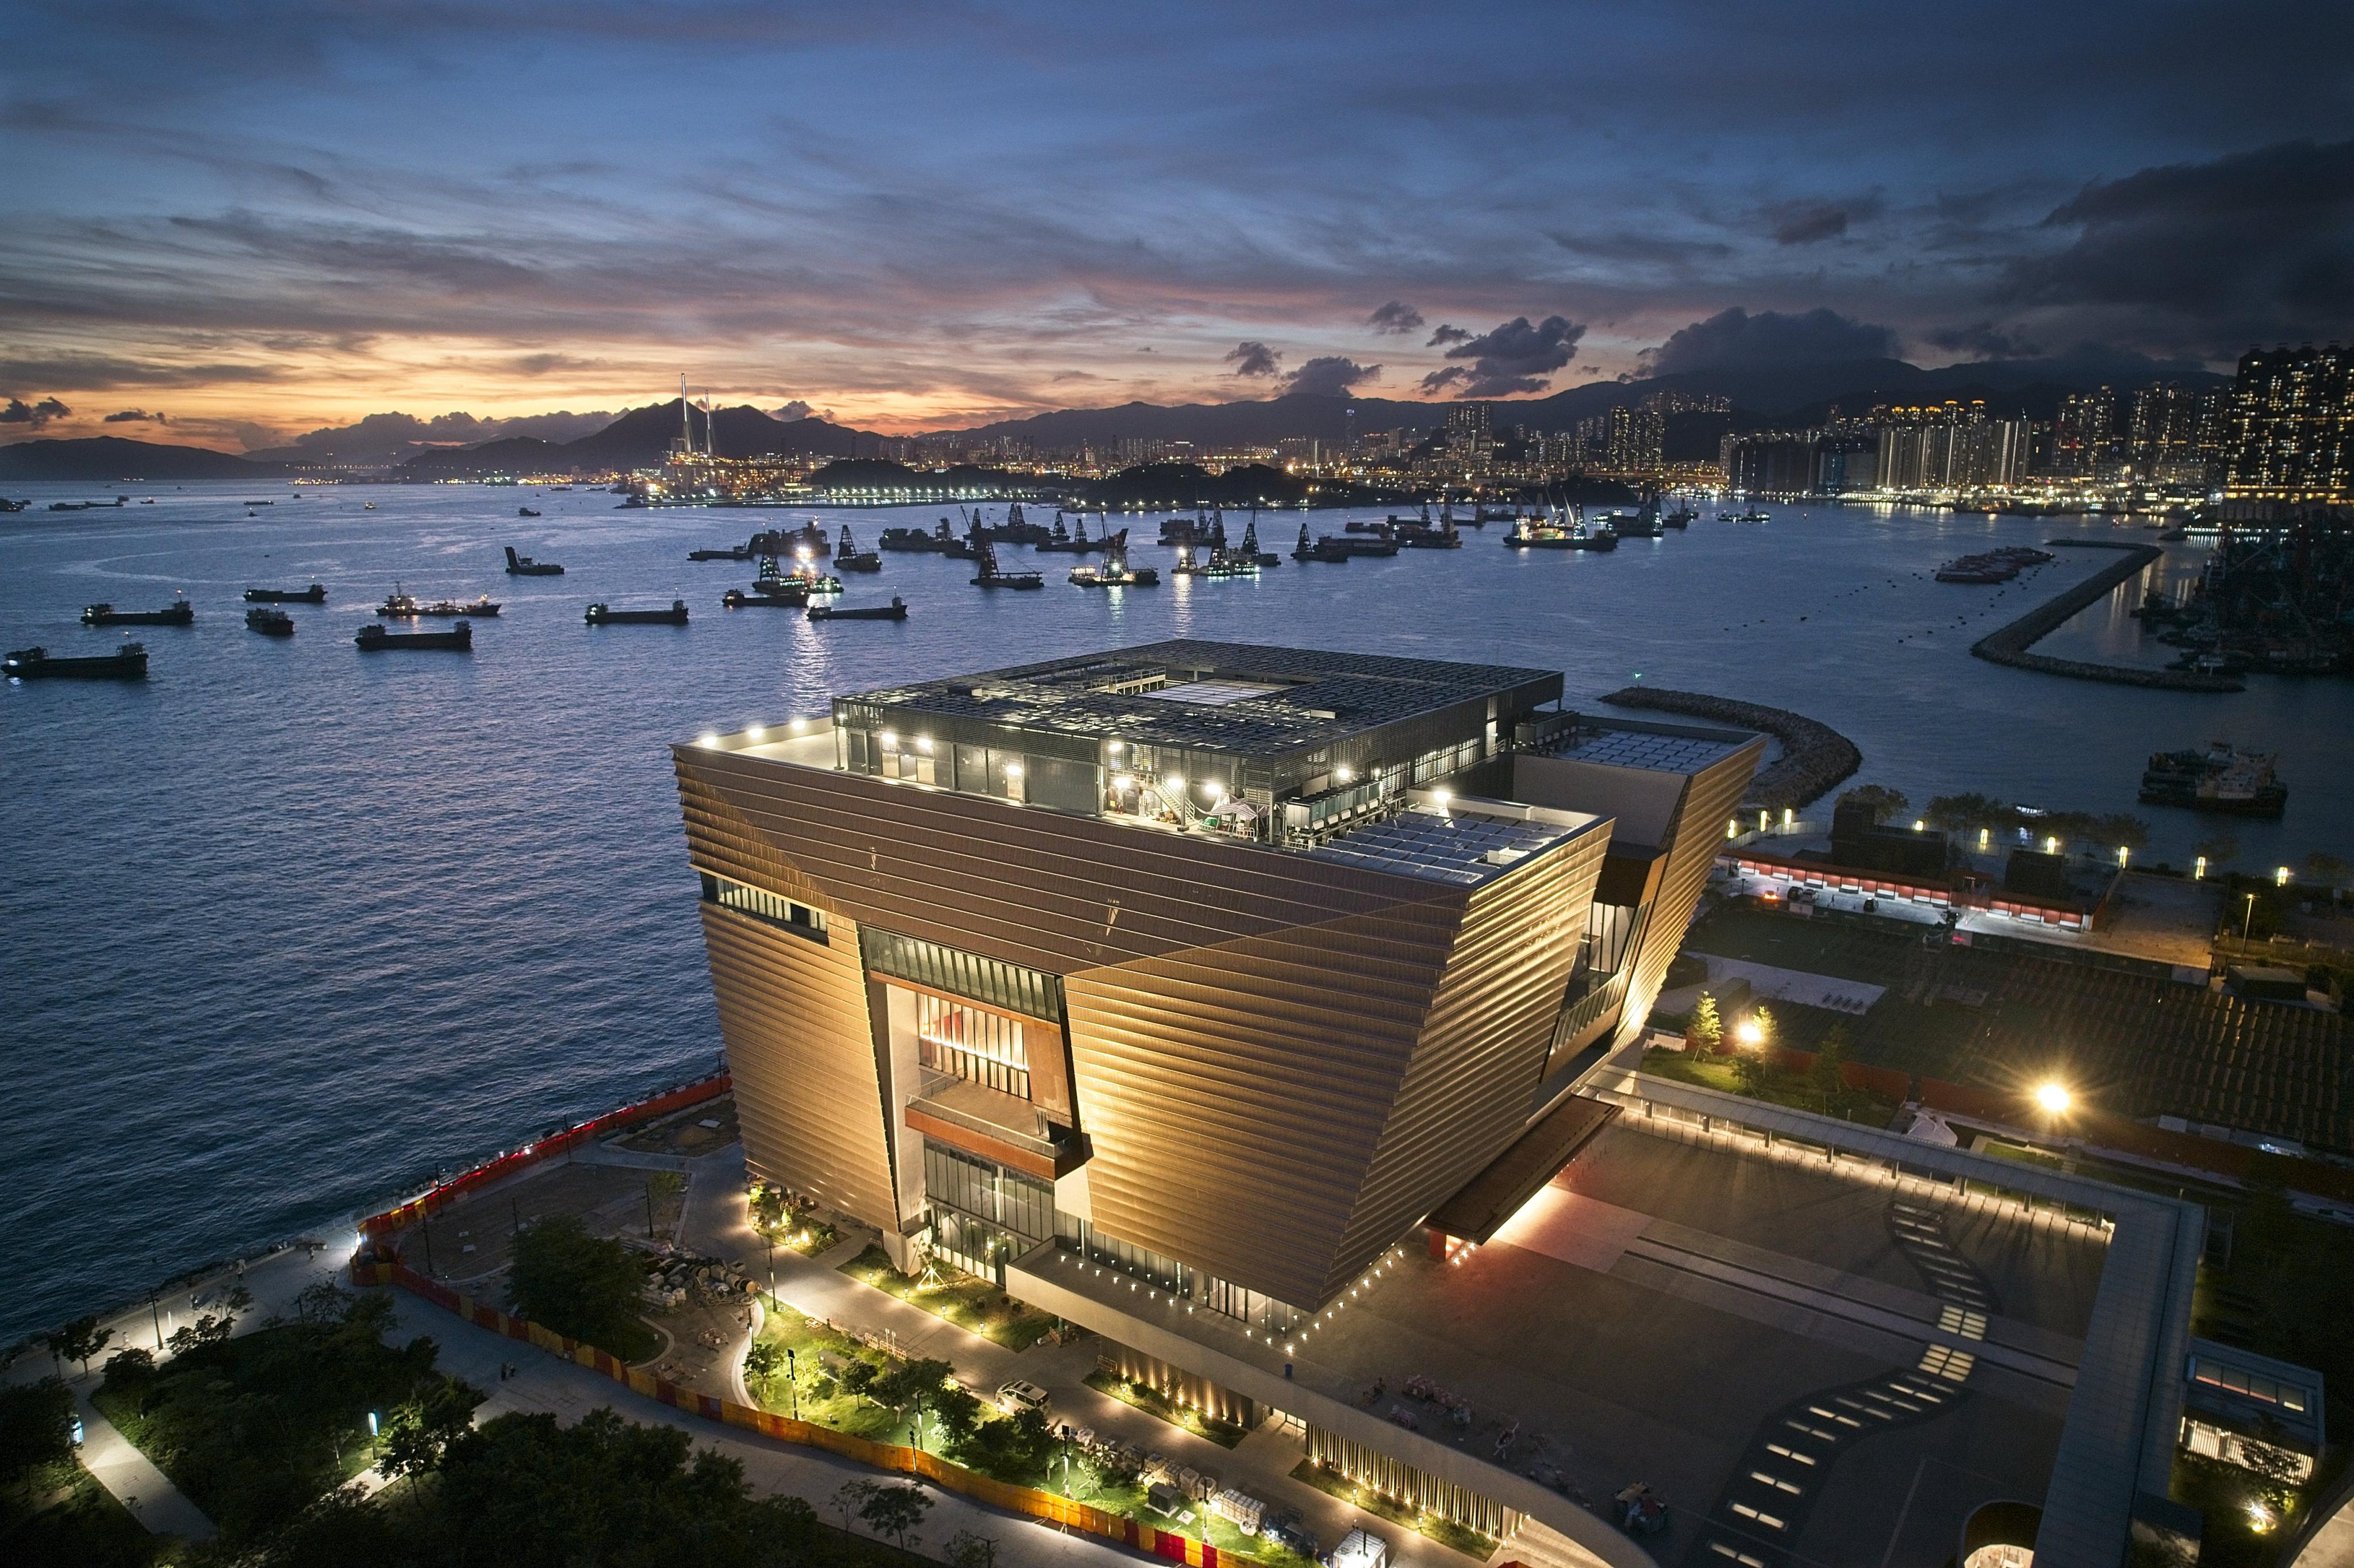 The Hong Kong Palace Museum, part of the West Kowloon Cultural District, is seen on May 29. A case study on West Kowloon could shed light on initial controversies and Hong Kong’s ambitions to become a hub for cultural exchange. Photo: Getty Images